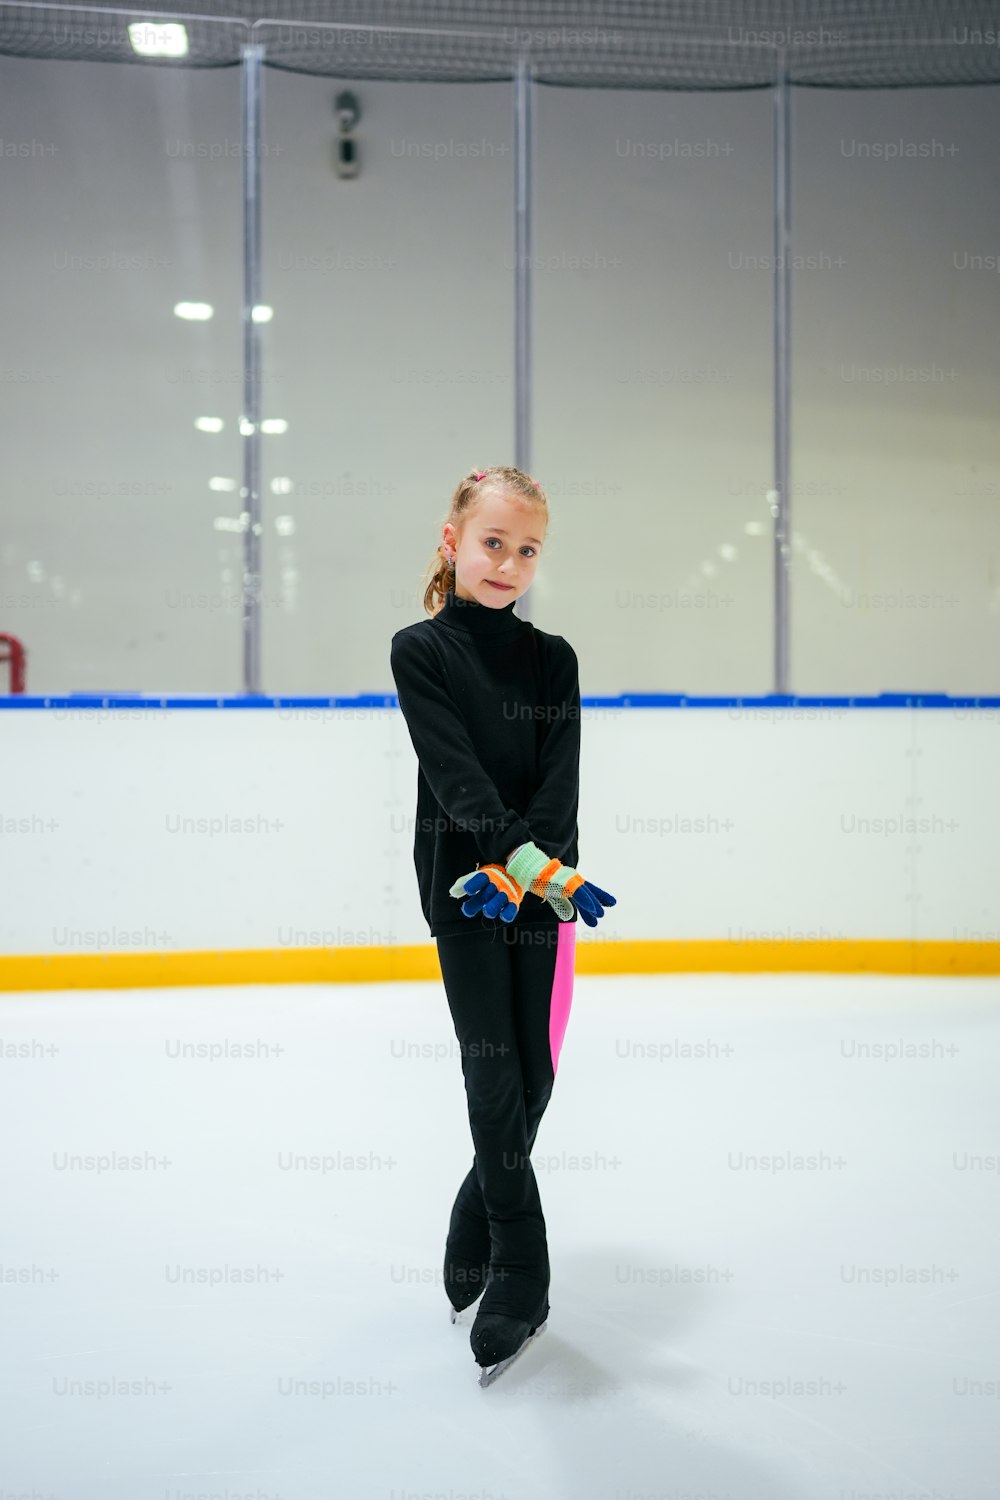 a young girl skating on an ice rink